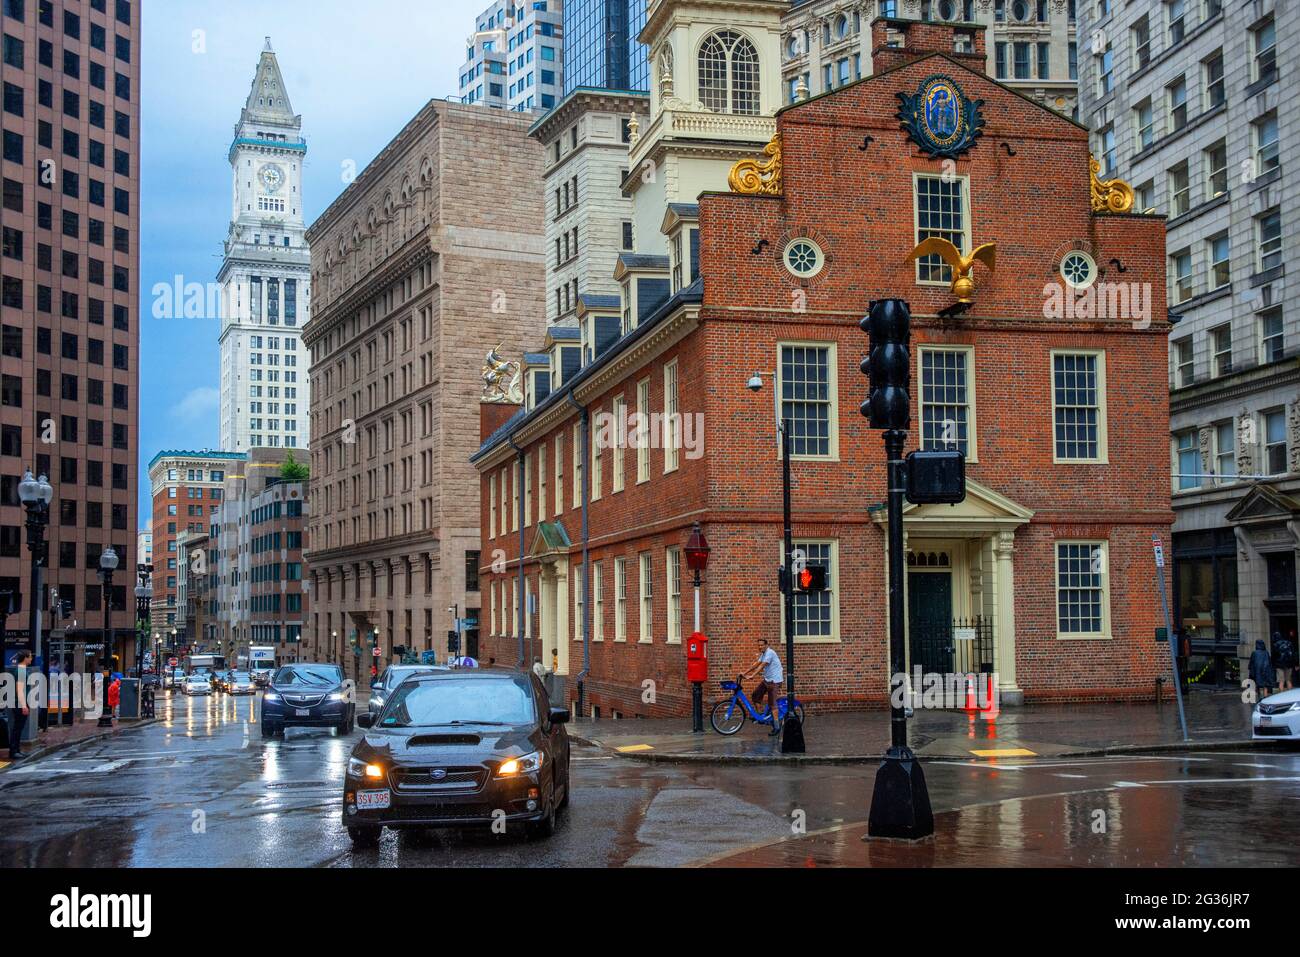 The Old State House, Boston. The historic site of the Declaration of Independence being read from the balcony in 1776. Downtown Crossing area of Bosto Stock Photo